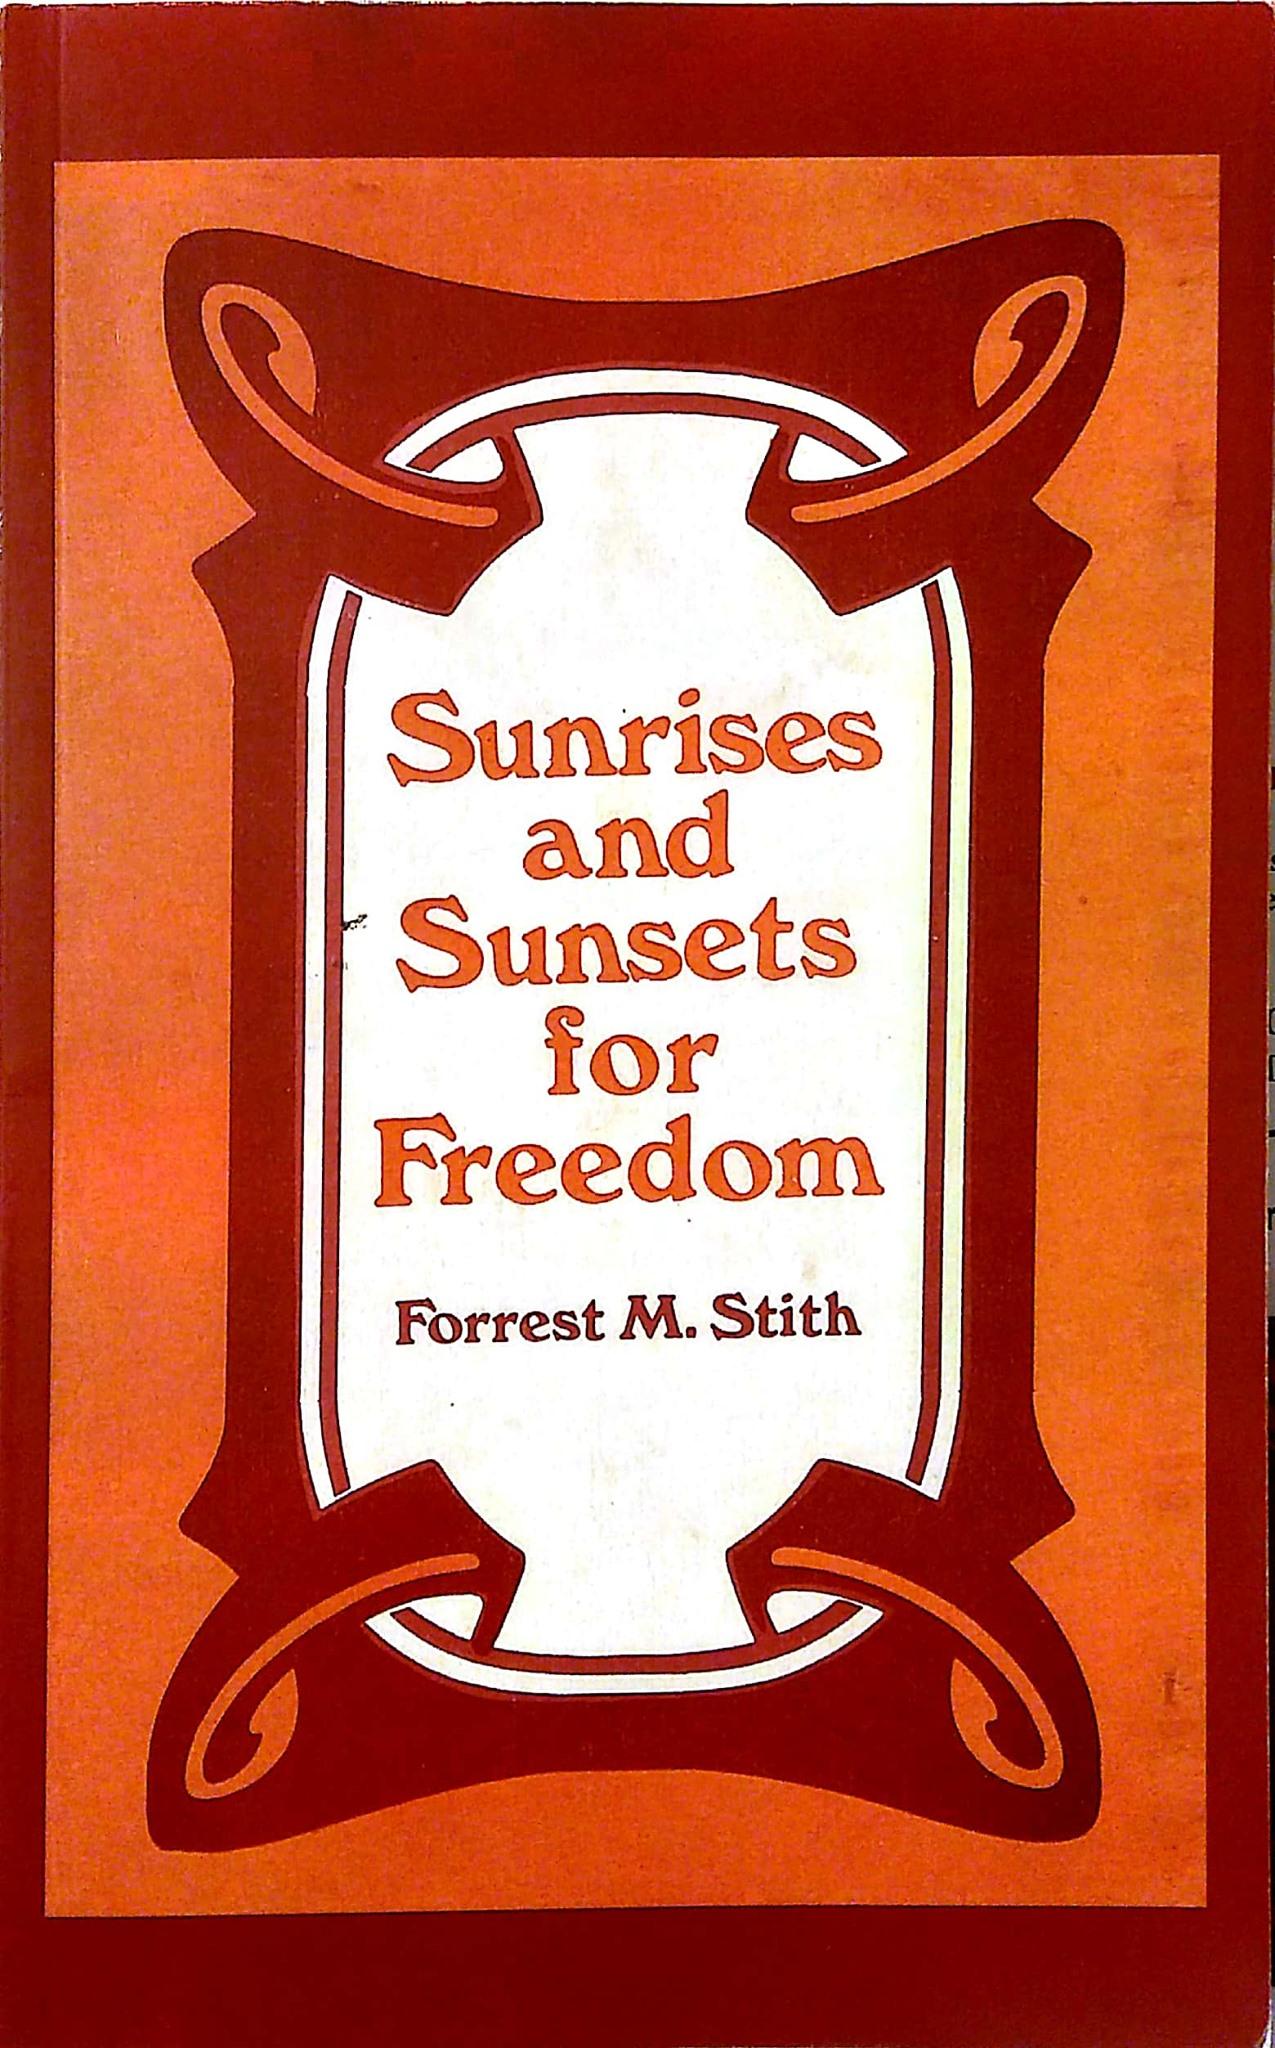 Black History Month Talk: Sunrises and Sunsets for Freedom